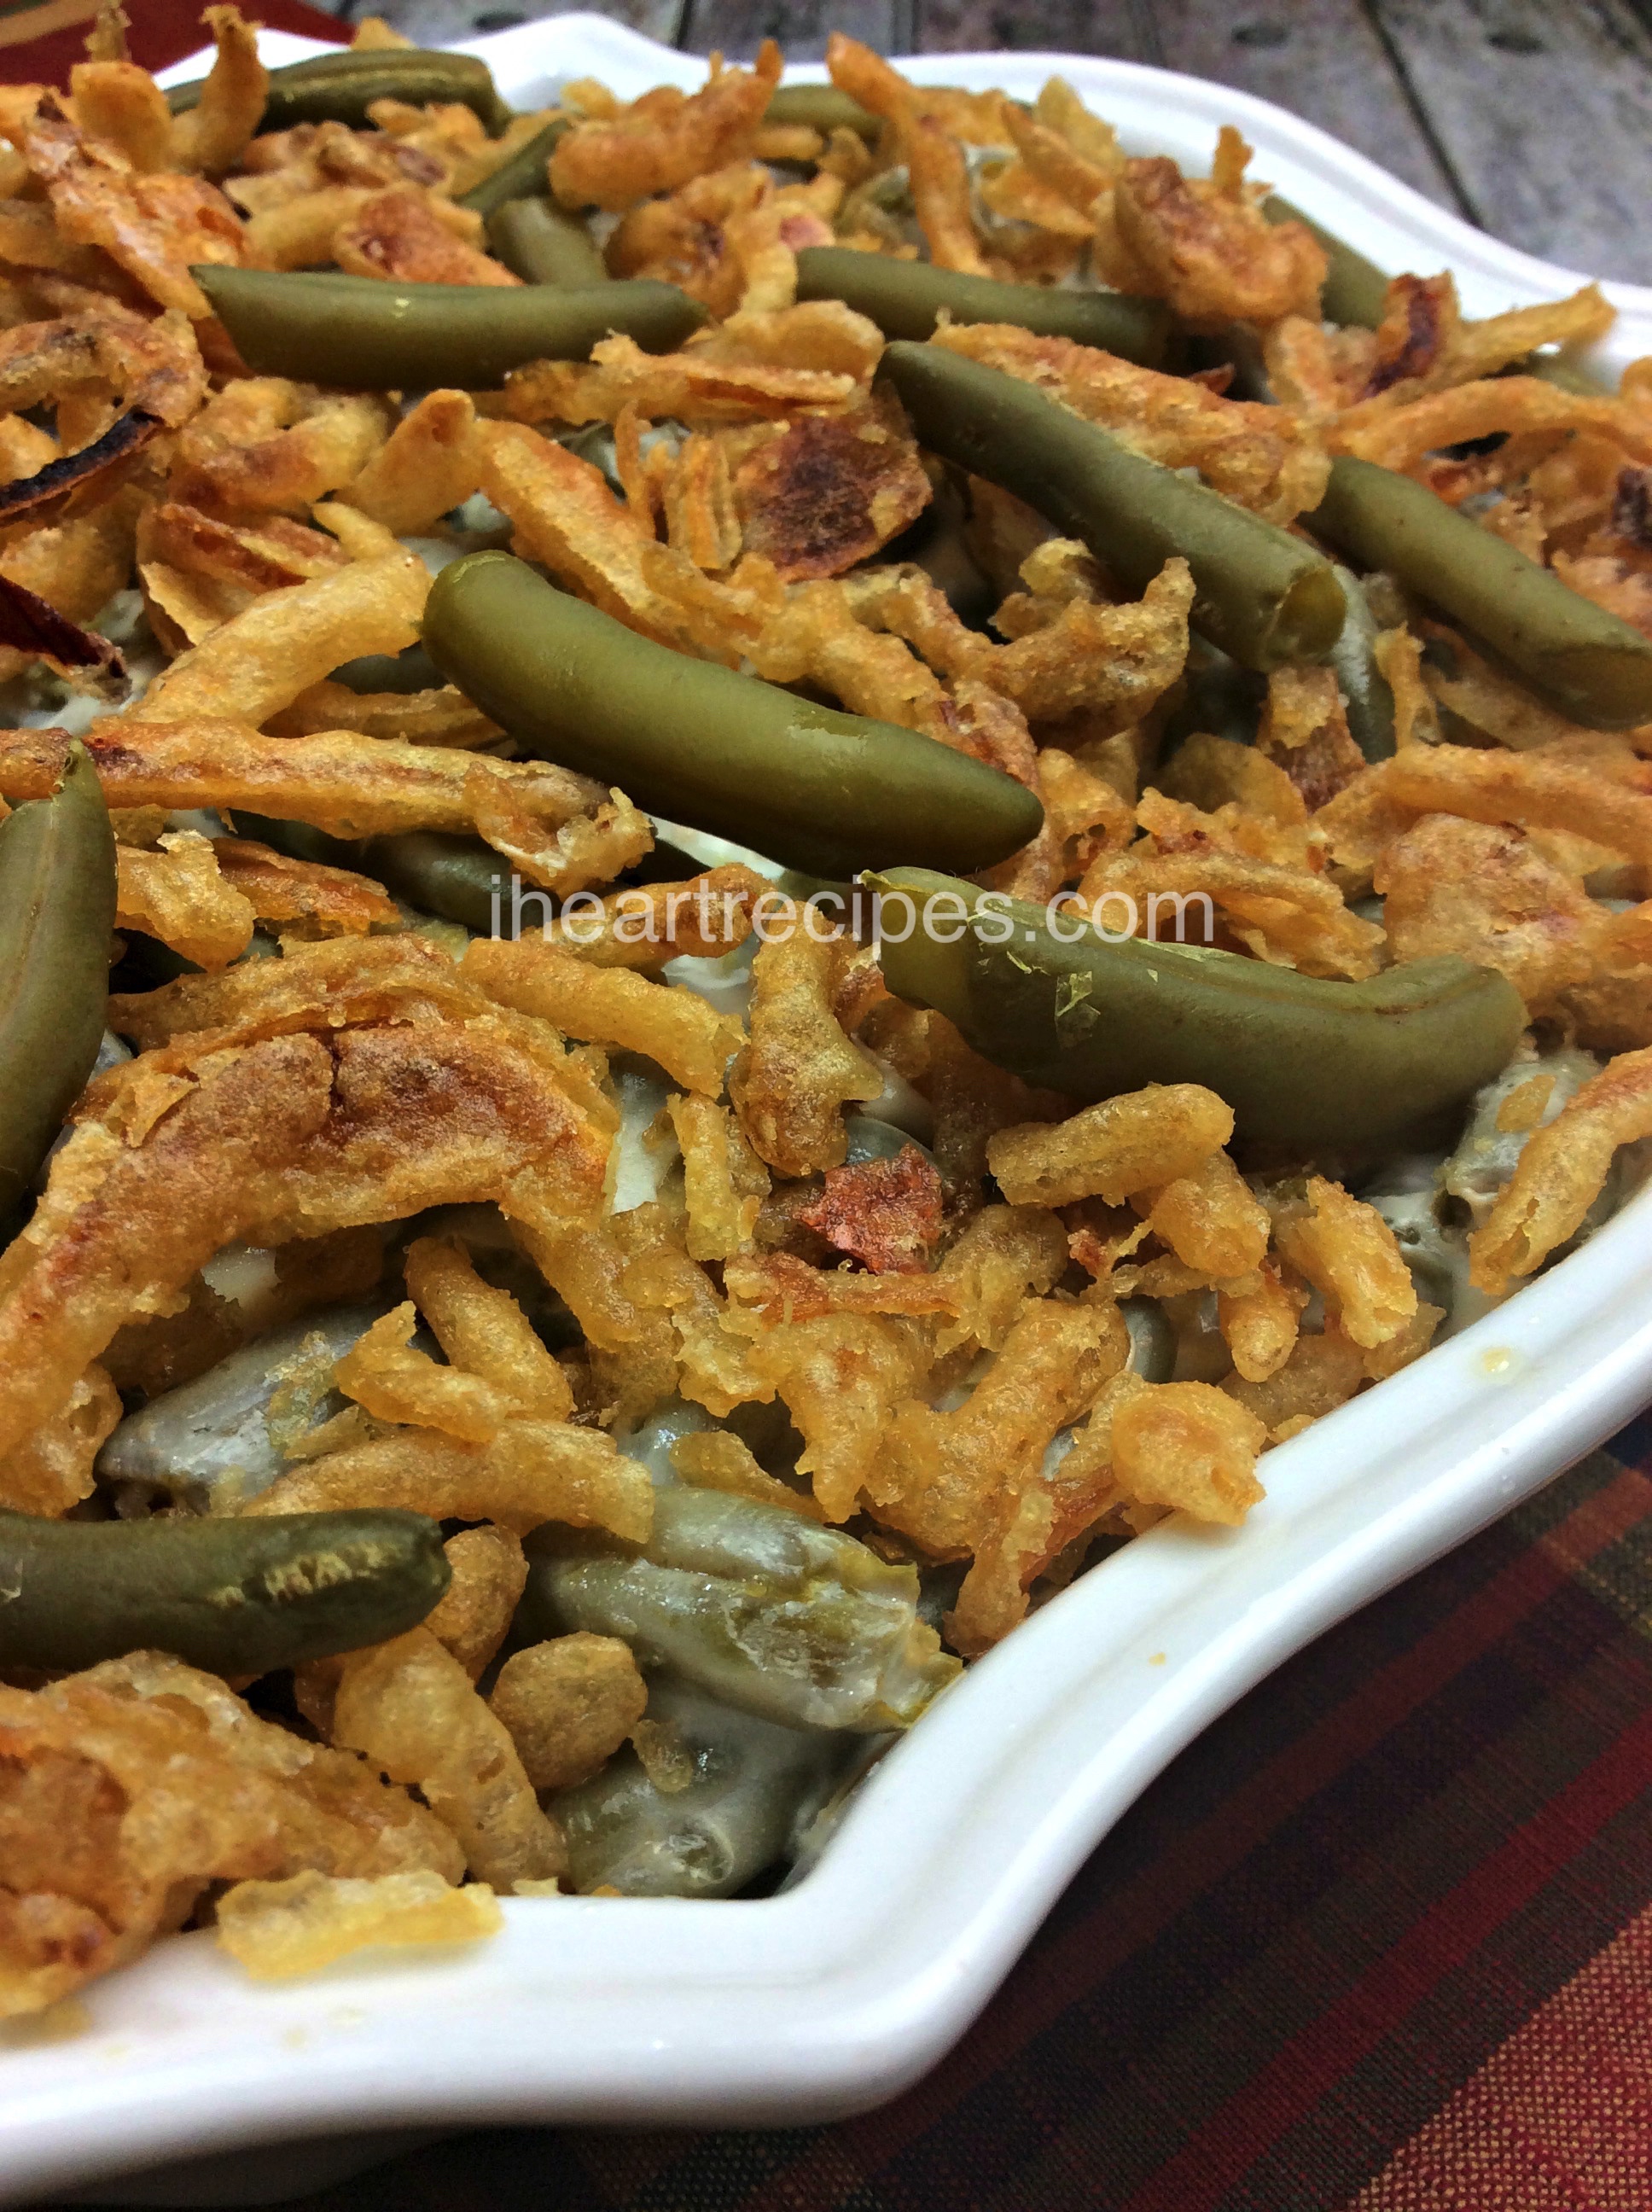 Crisp french fried onions top this creamy, classic green bean casserole